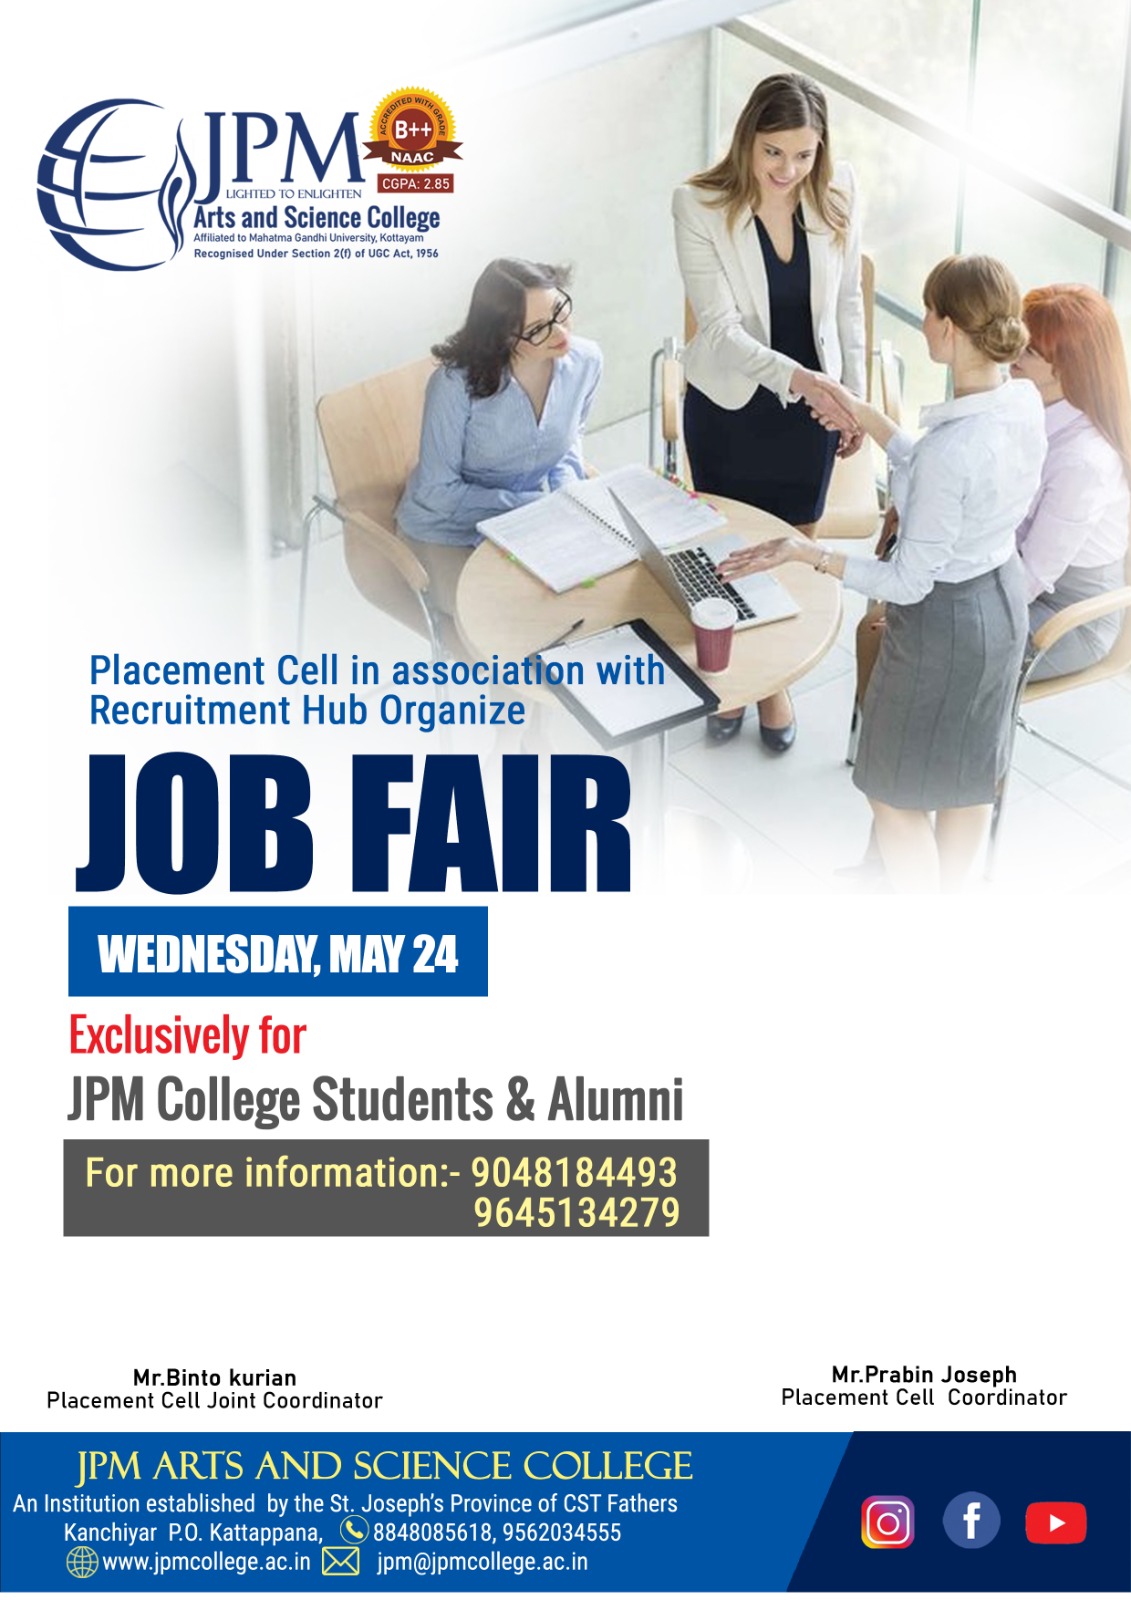 Job Fair exclusively for JPM College Students & Alumni